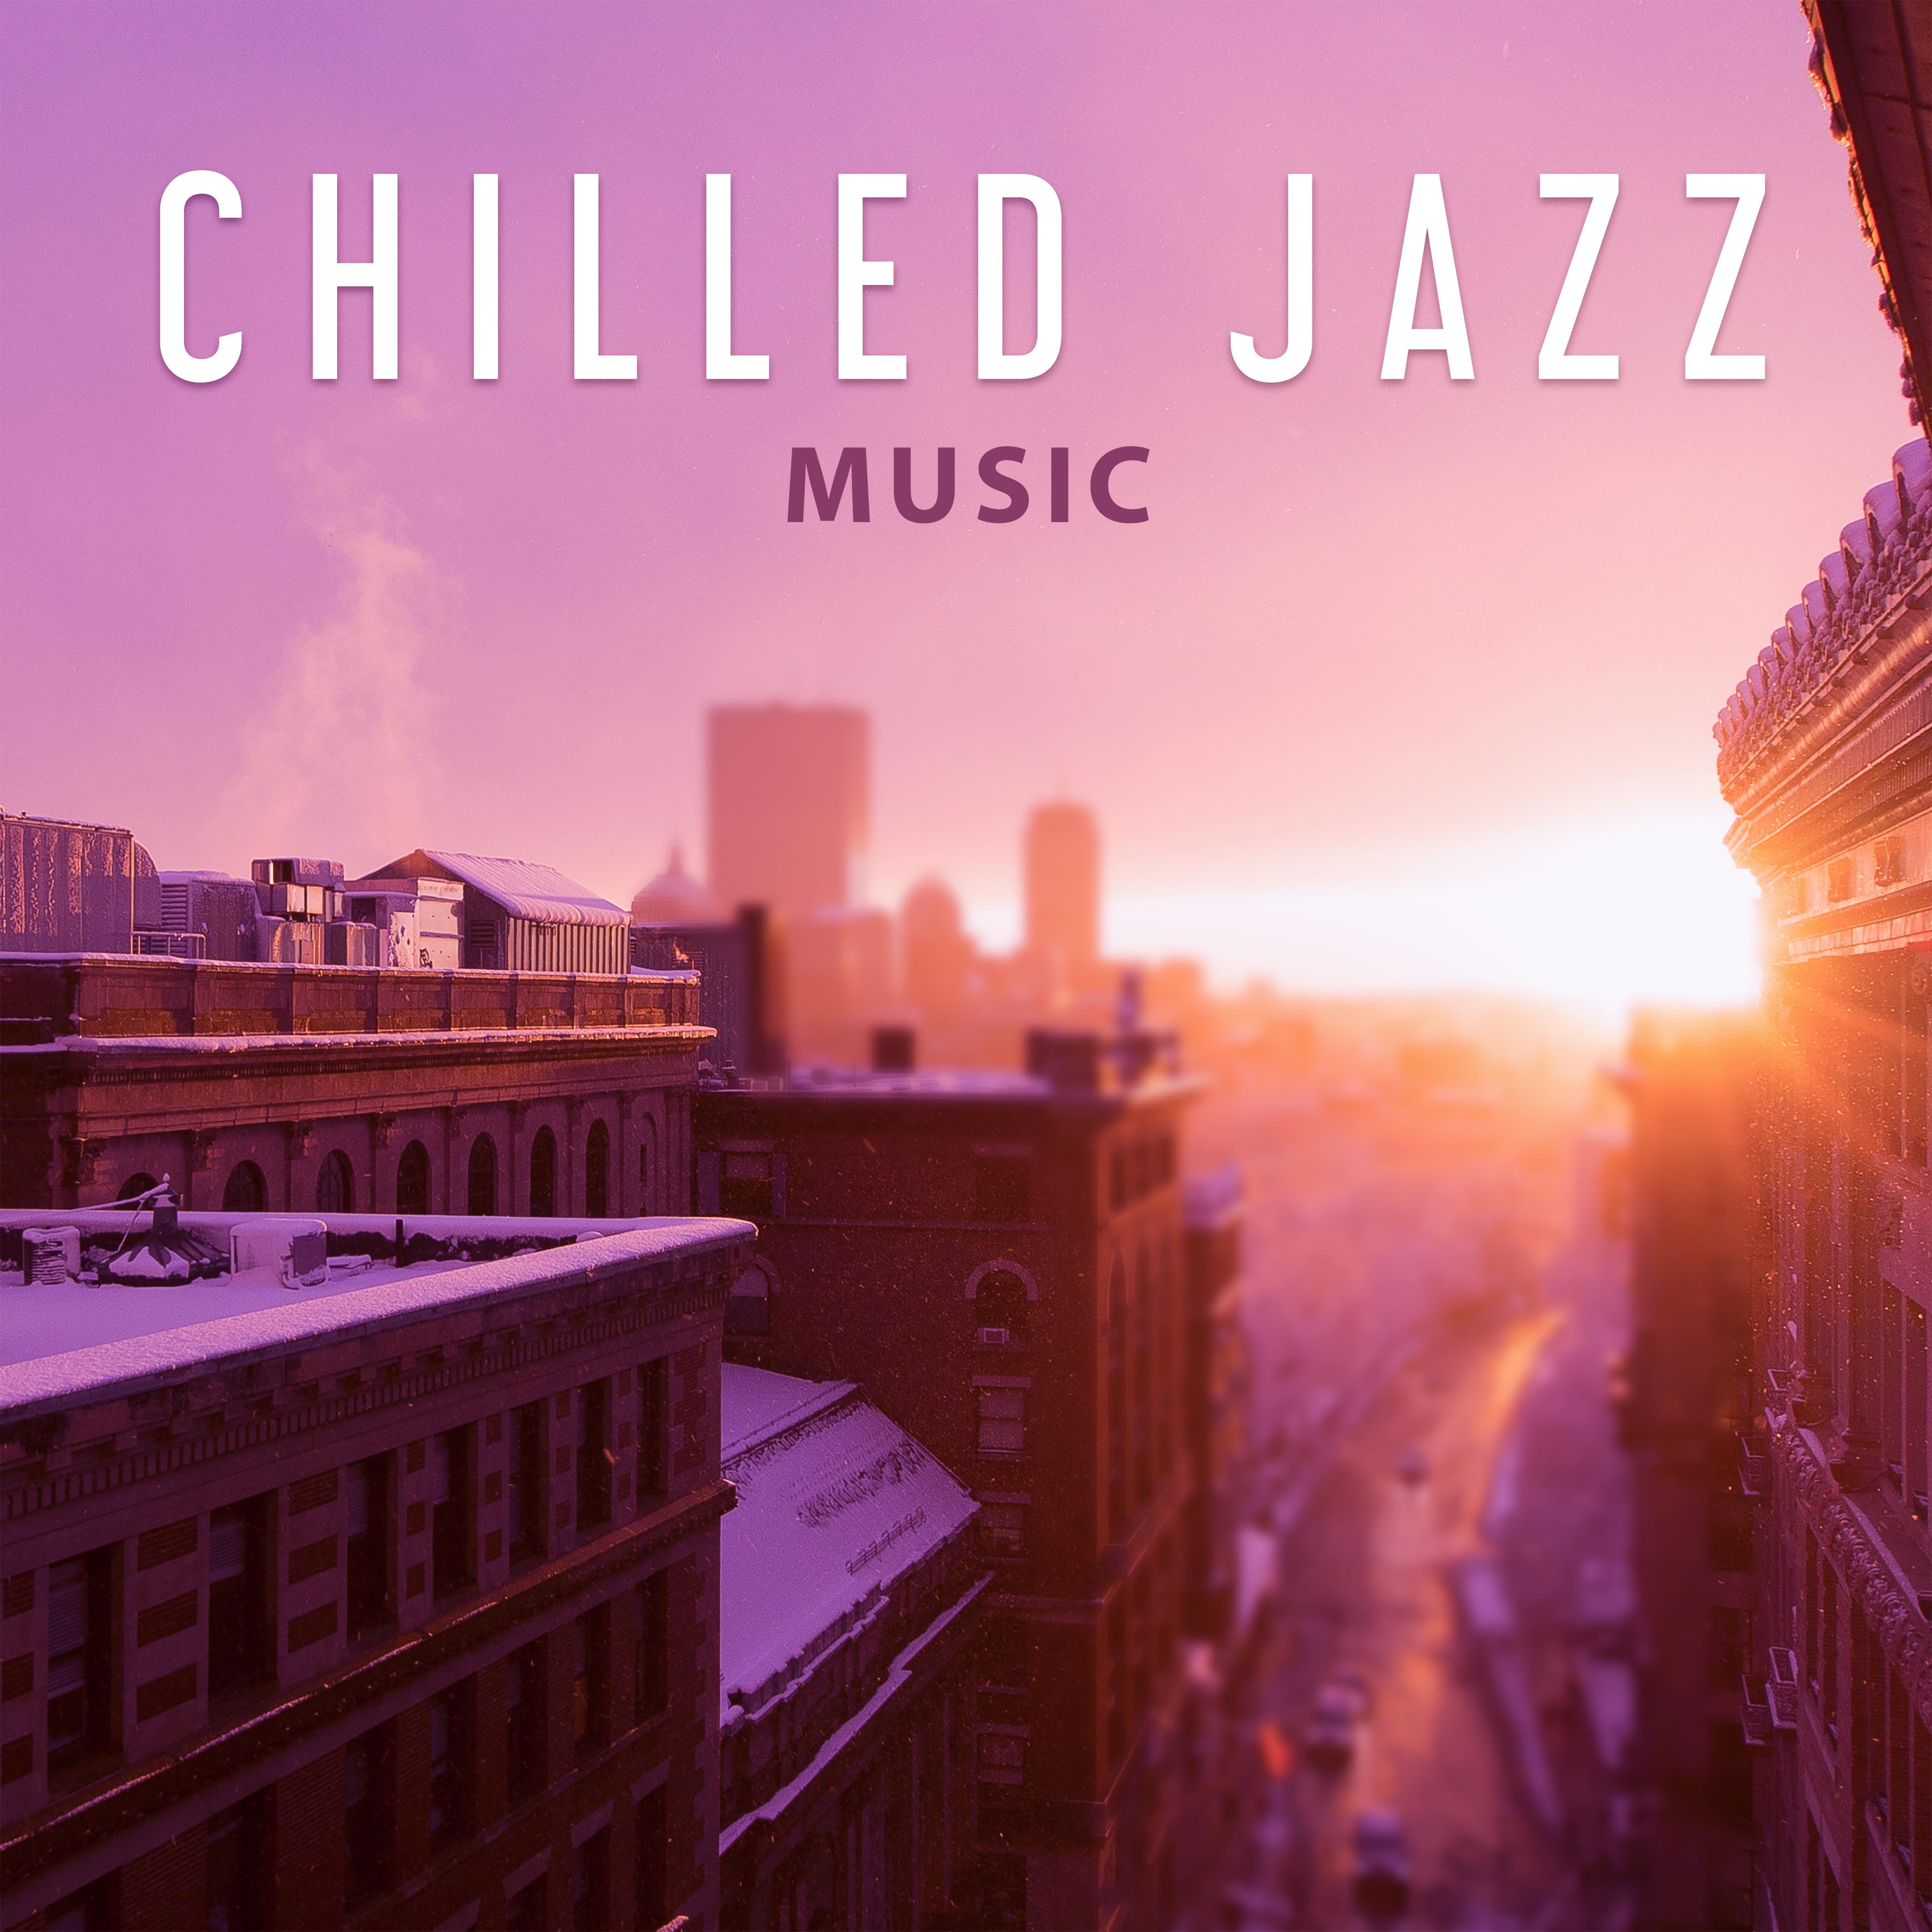 Chilled Jazz Music  Relaxing Jazz, Smooth Sounds to Rest, Free Time, Coffee Break, Easy Listening